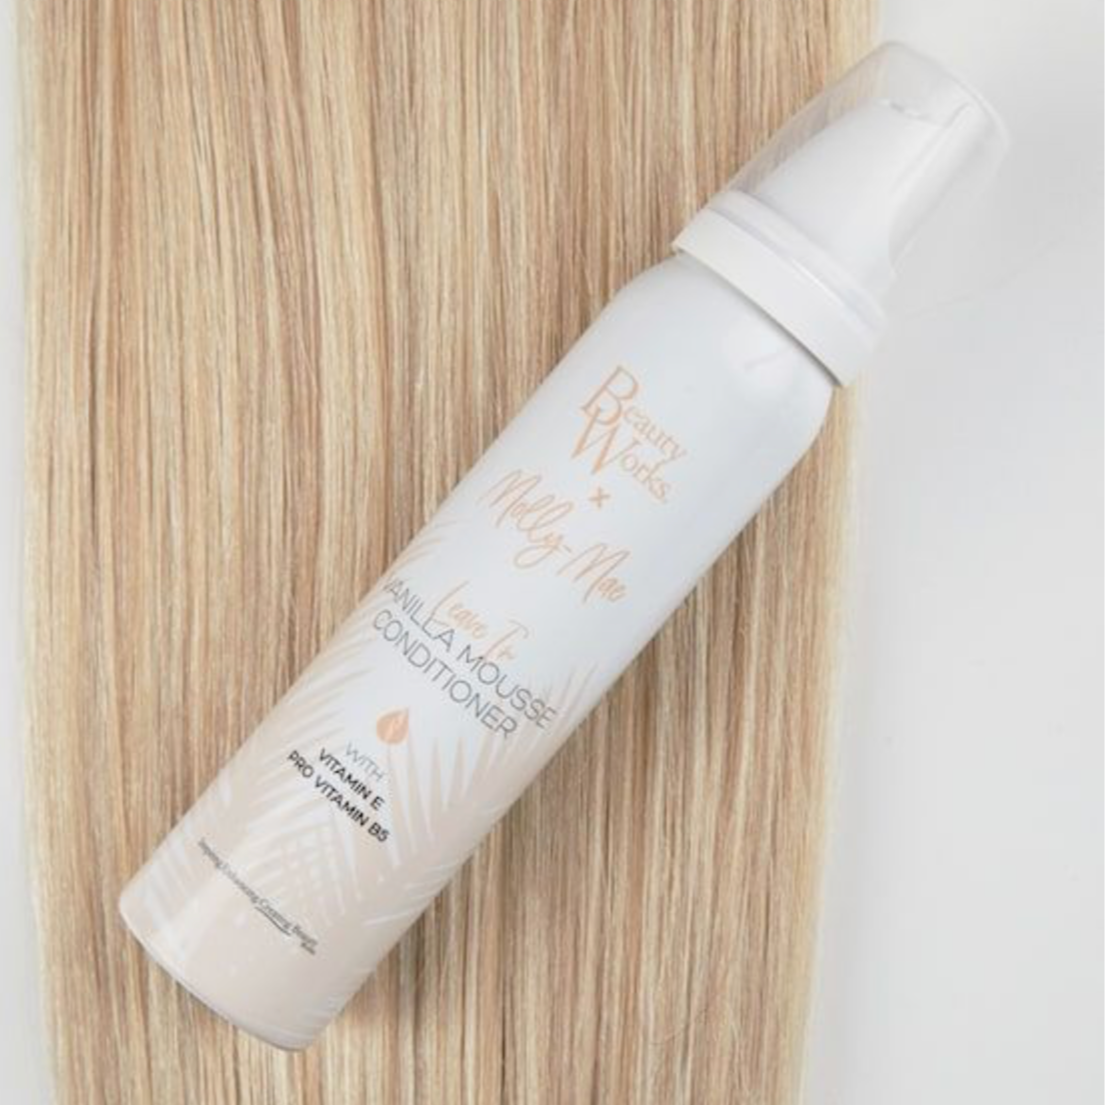 Beauty Works X Molly Mae Leave-In Vanilla Mousse Conditioner used on hair